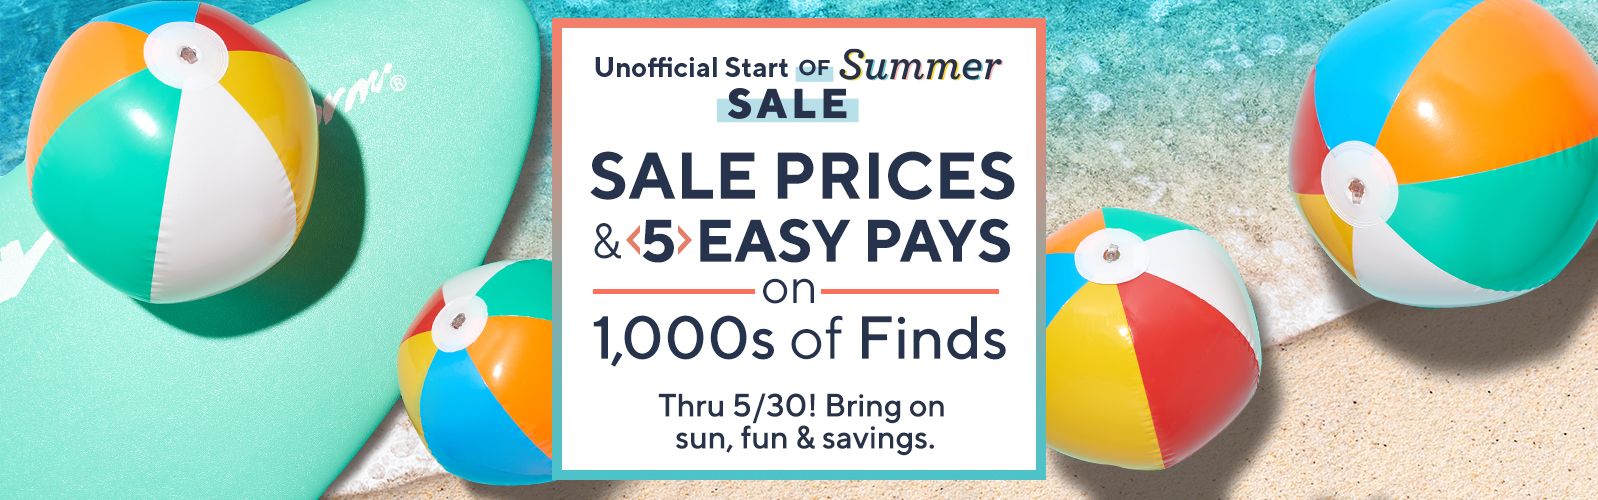 Unofficial Start of Summer Sale - Sale Prices & 5 Easy Pays on 1,000s of Finds Thru 5/30! Bring on sun, fun & savings.